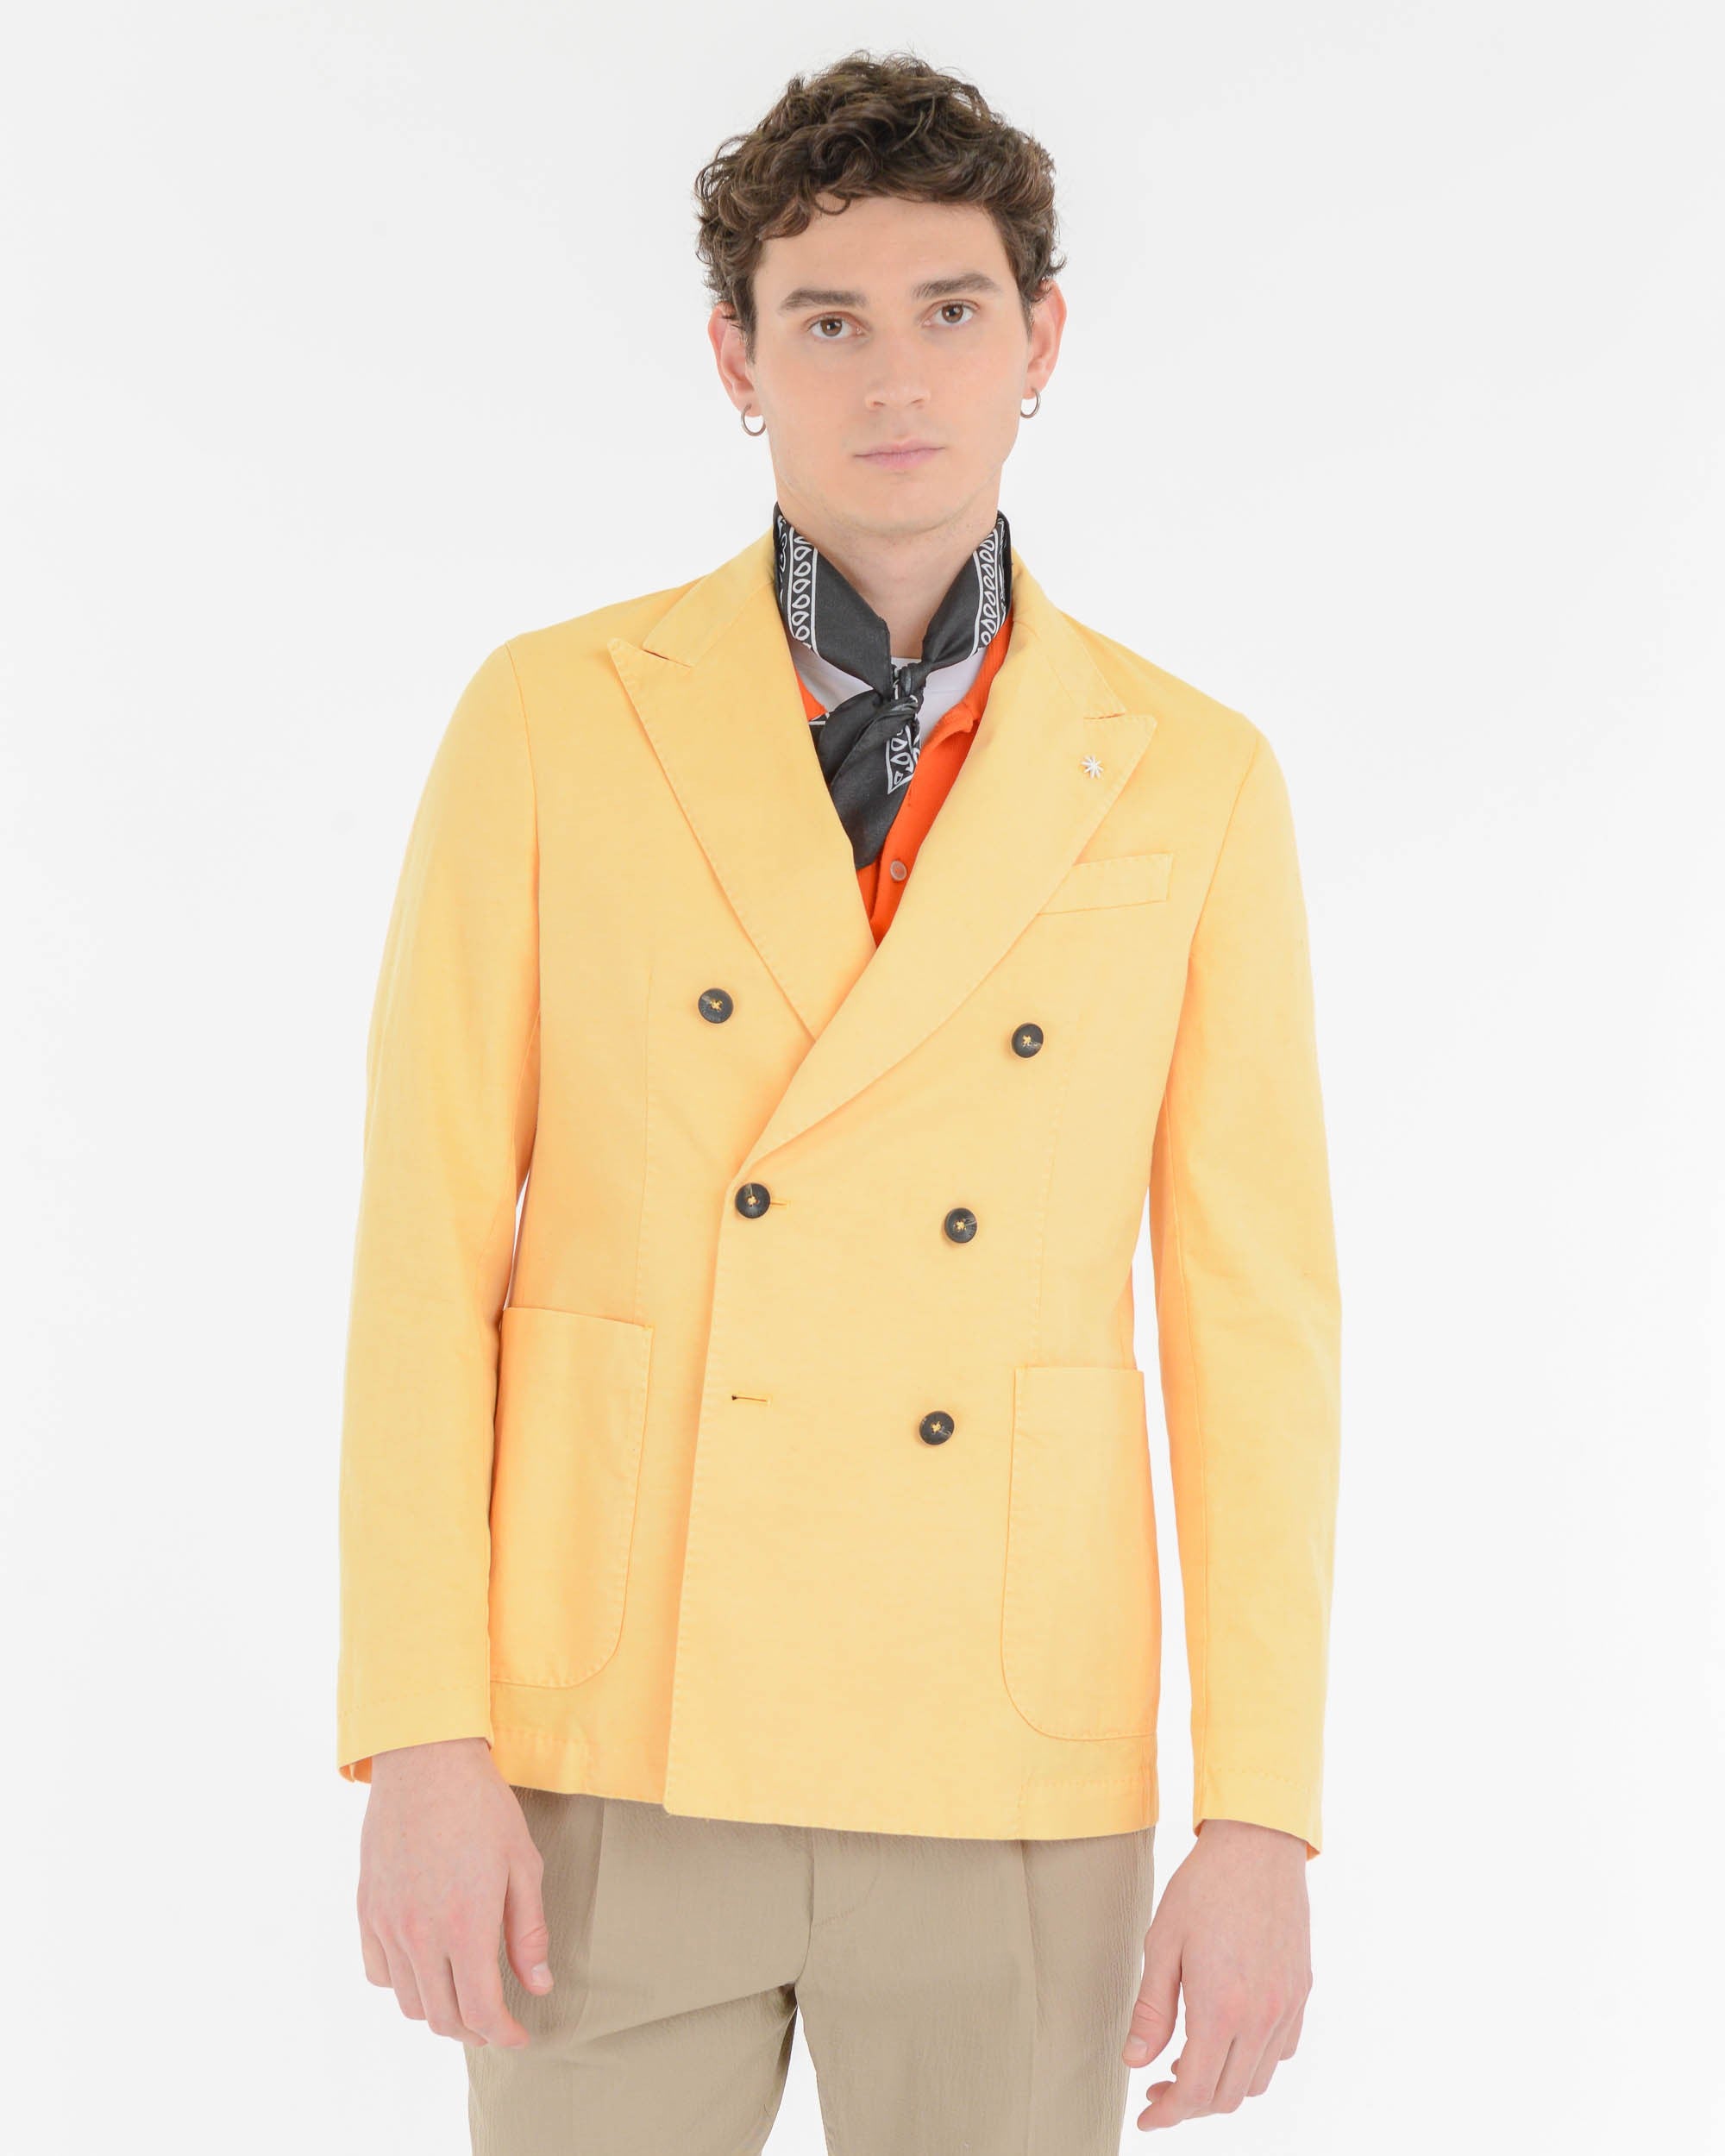 Men's Jackets and Blazers - Manuel Ritz Official